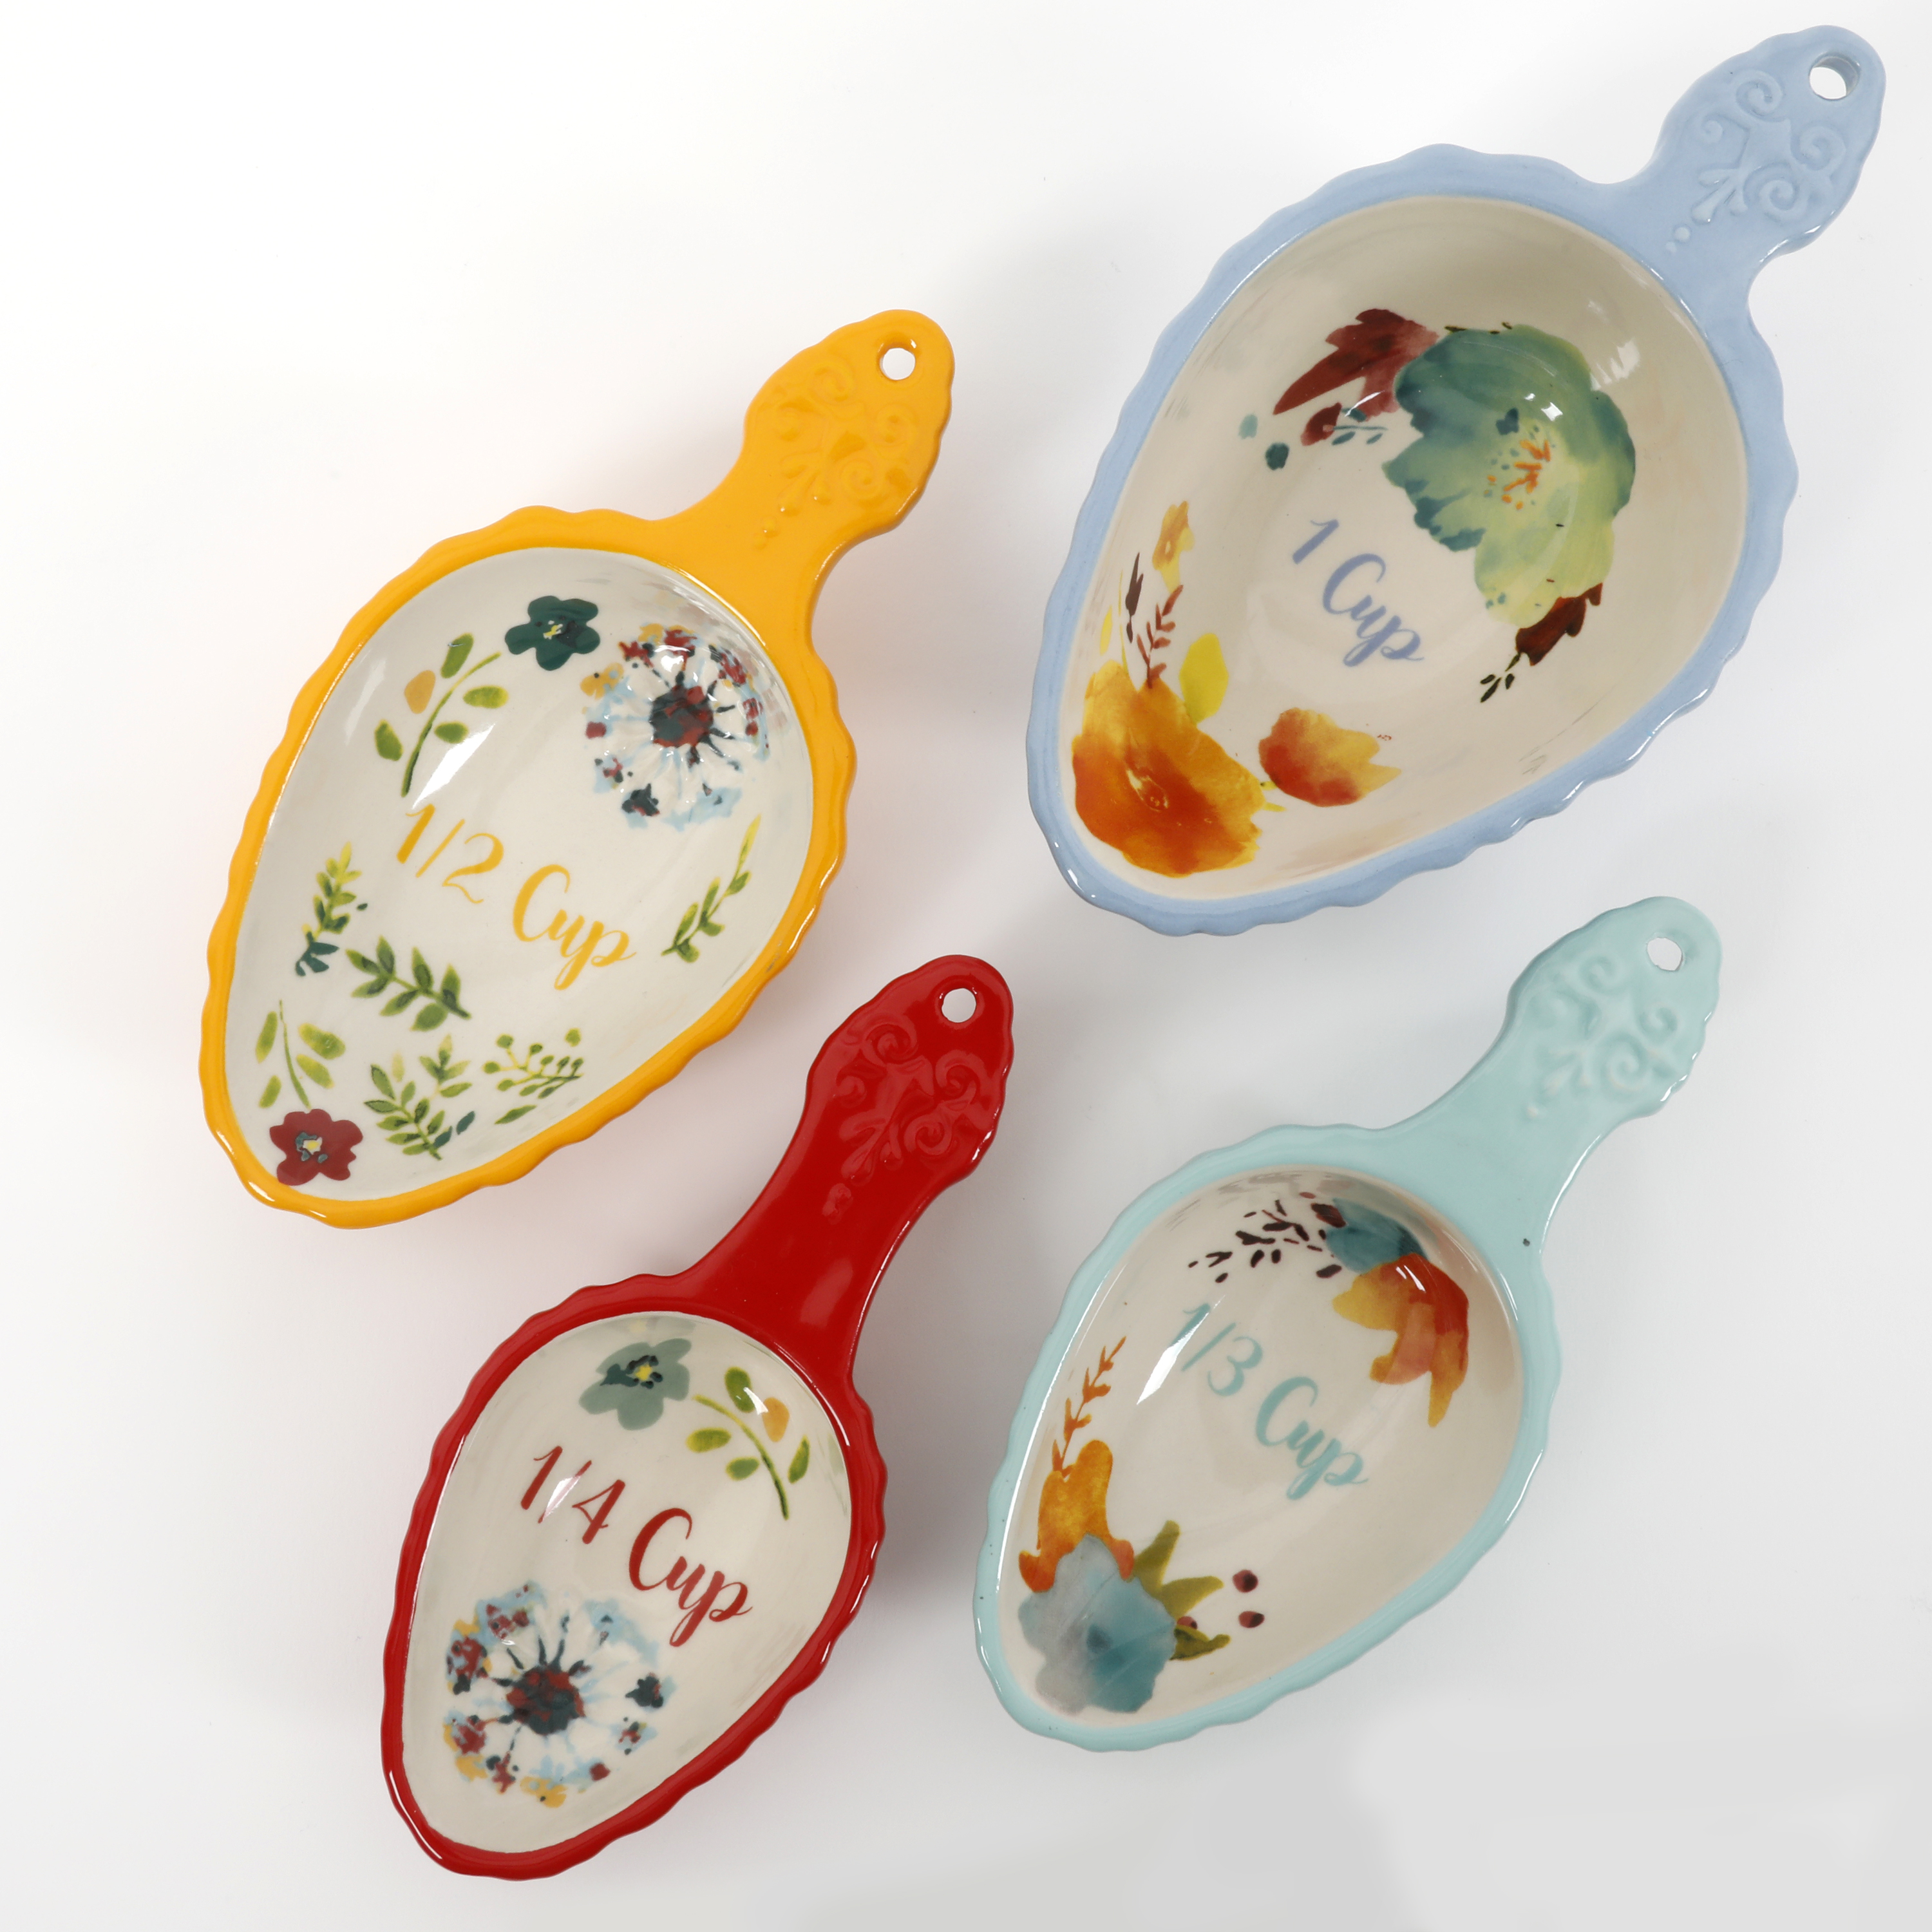 The Pioneer Woman Willow 8-Piece Stoneware Measuring Spoon and Scoop Set - image 4 of 14